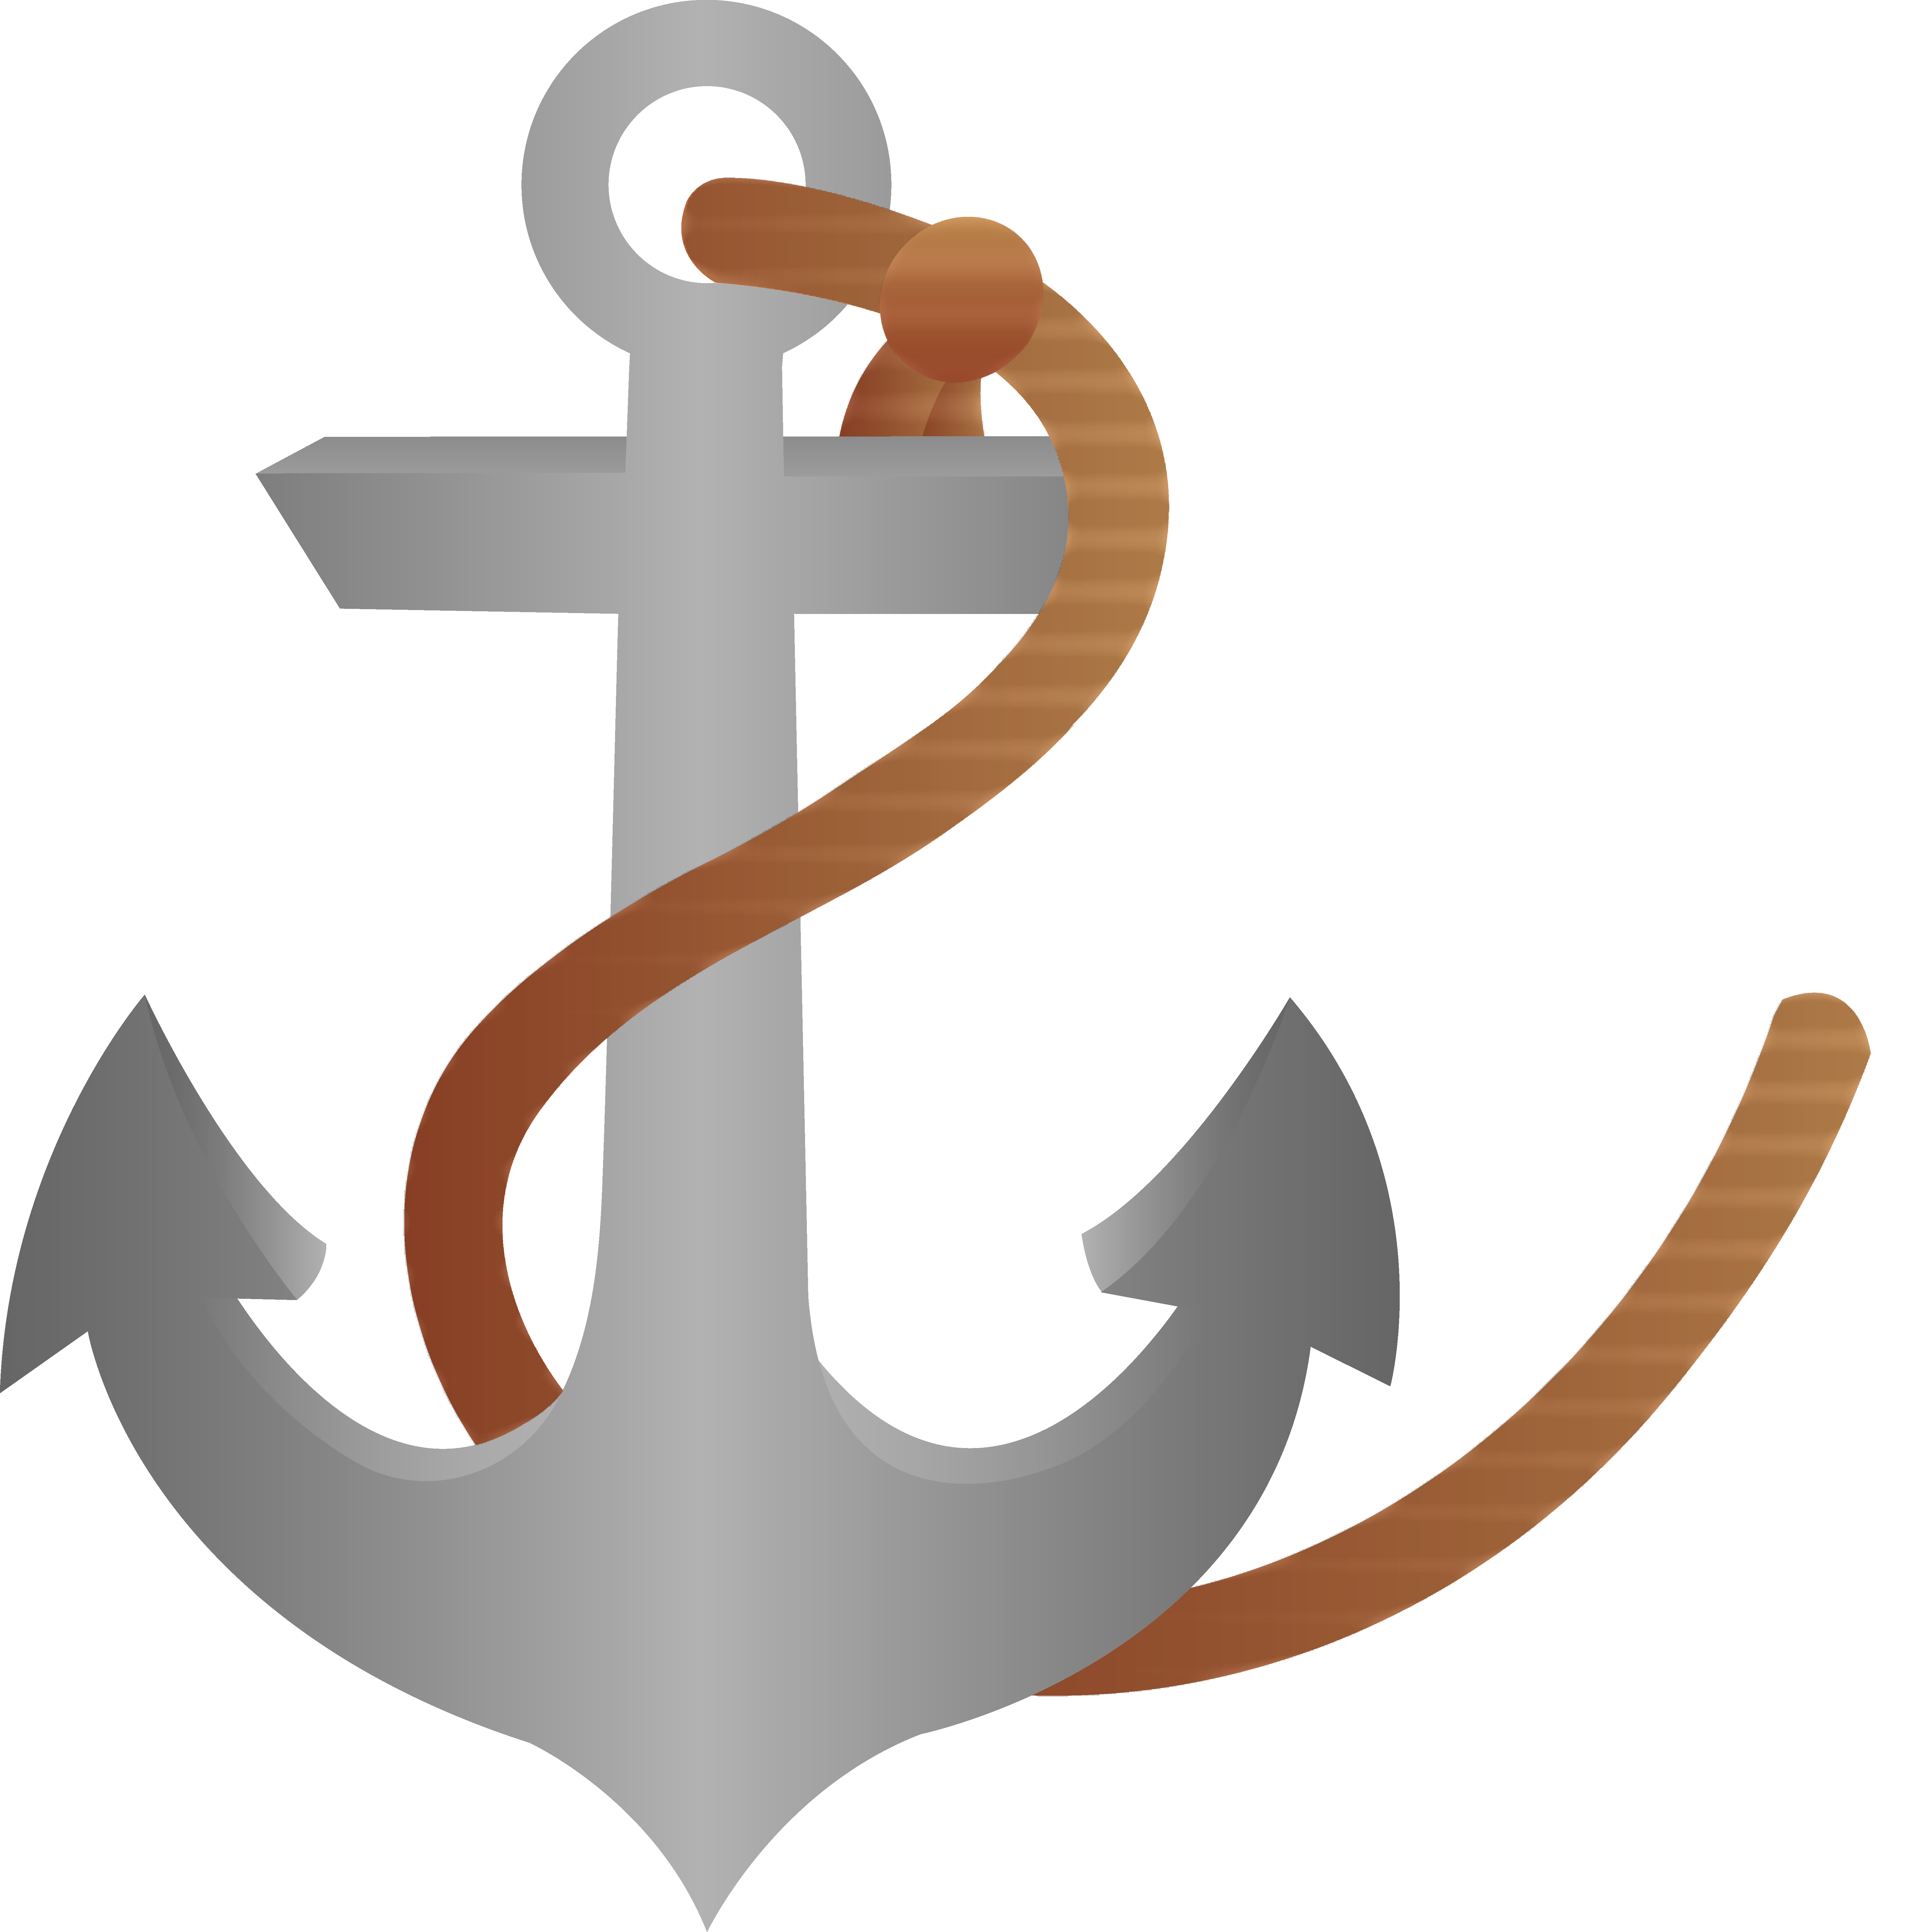 Ship anchor with free. Clipart clothes rope